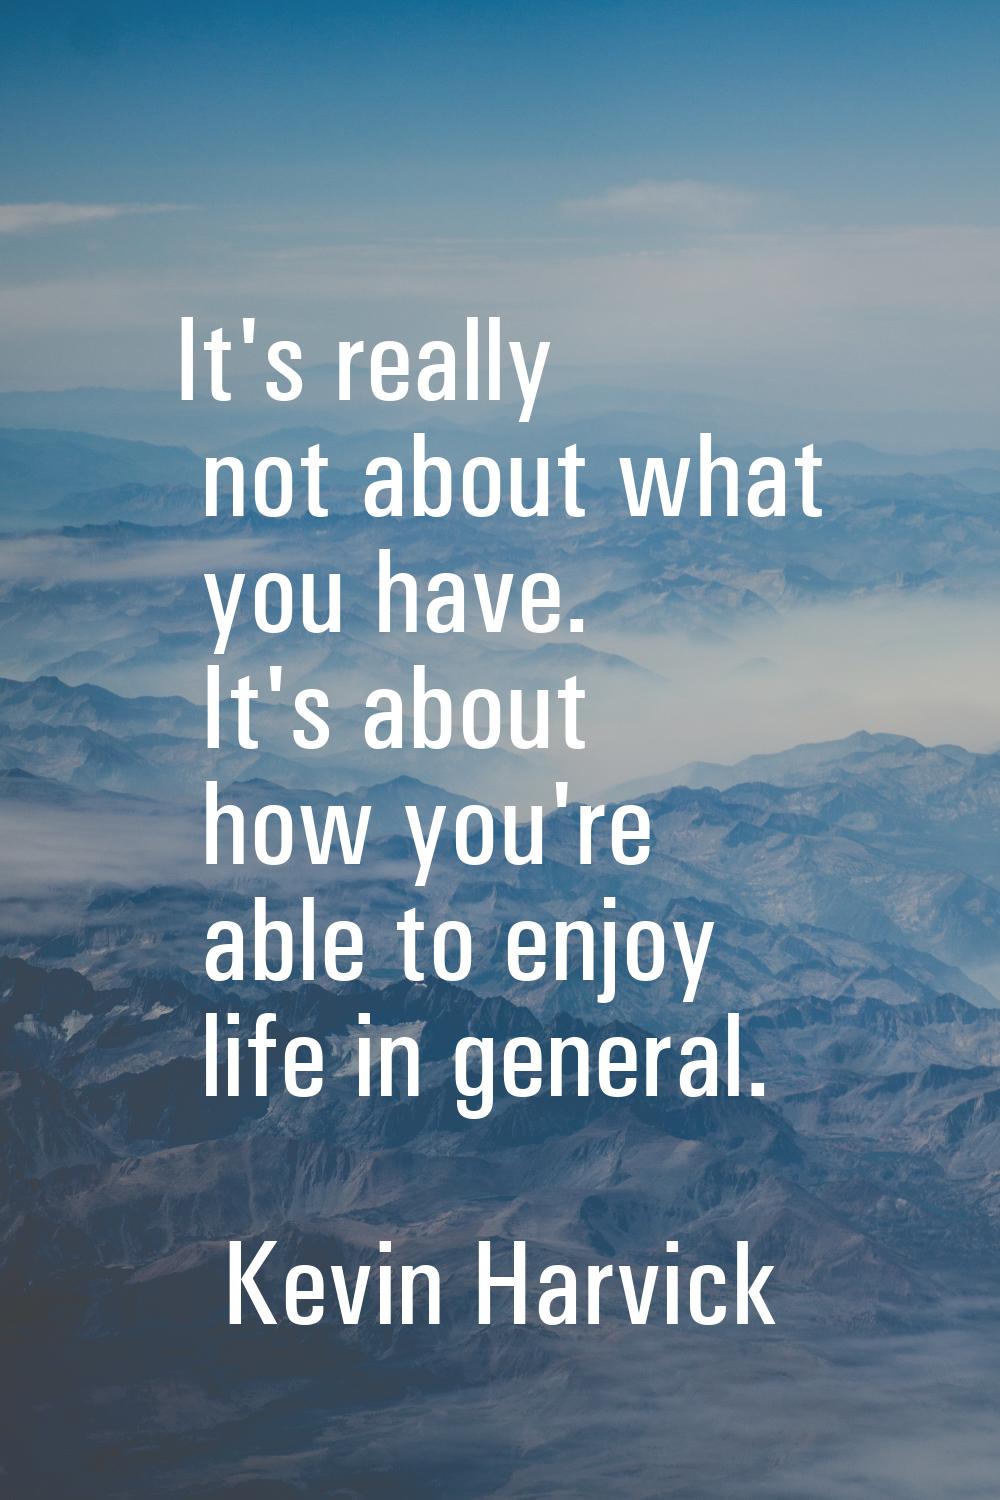 It's really not about what you have. It's about how you're able to enjoy life in general.